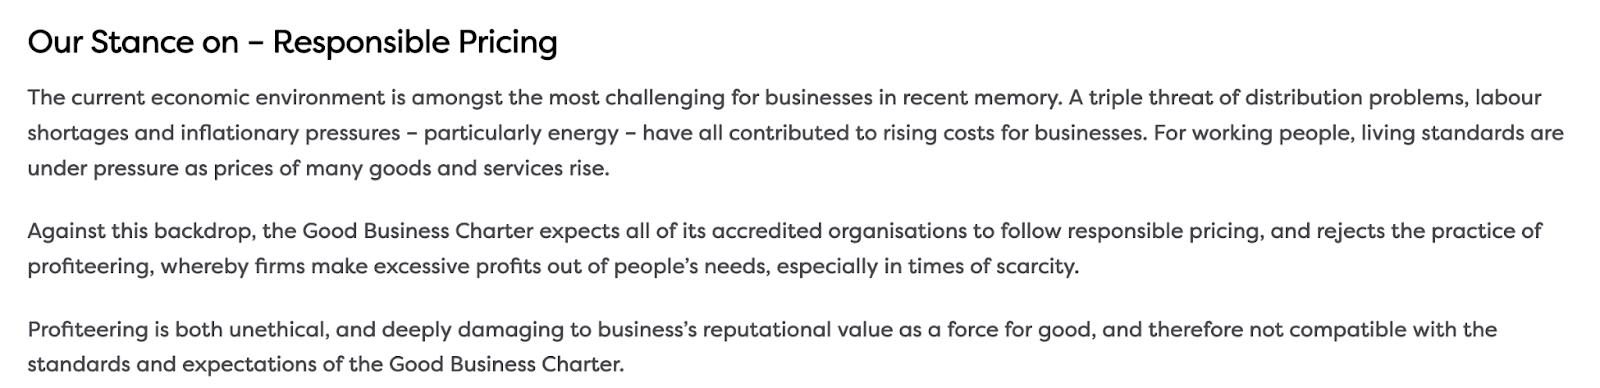 Good Business Charter customer service policy example: company values